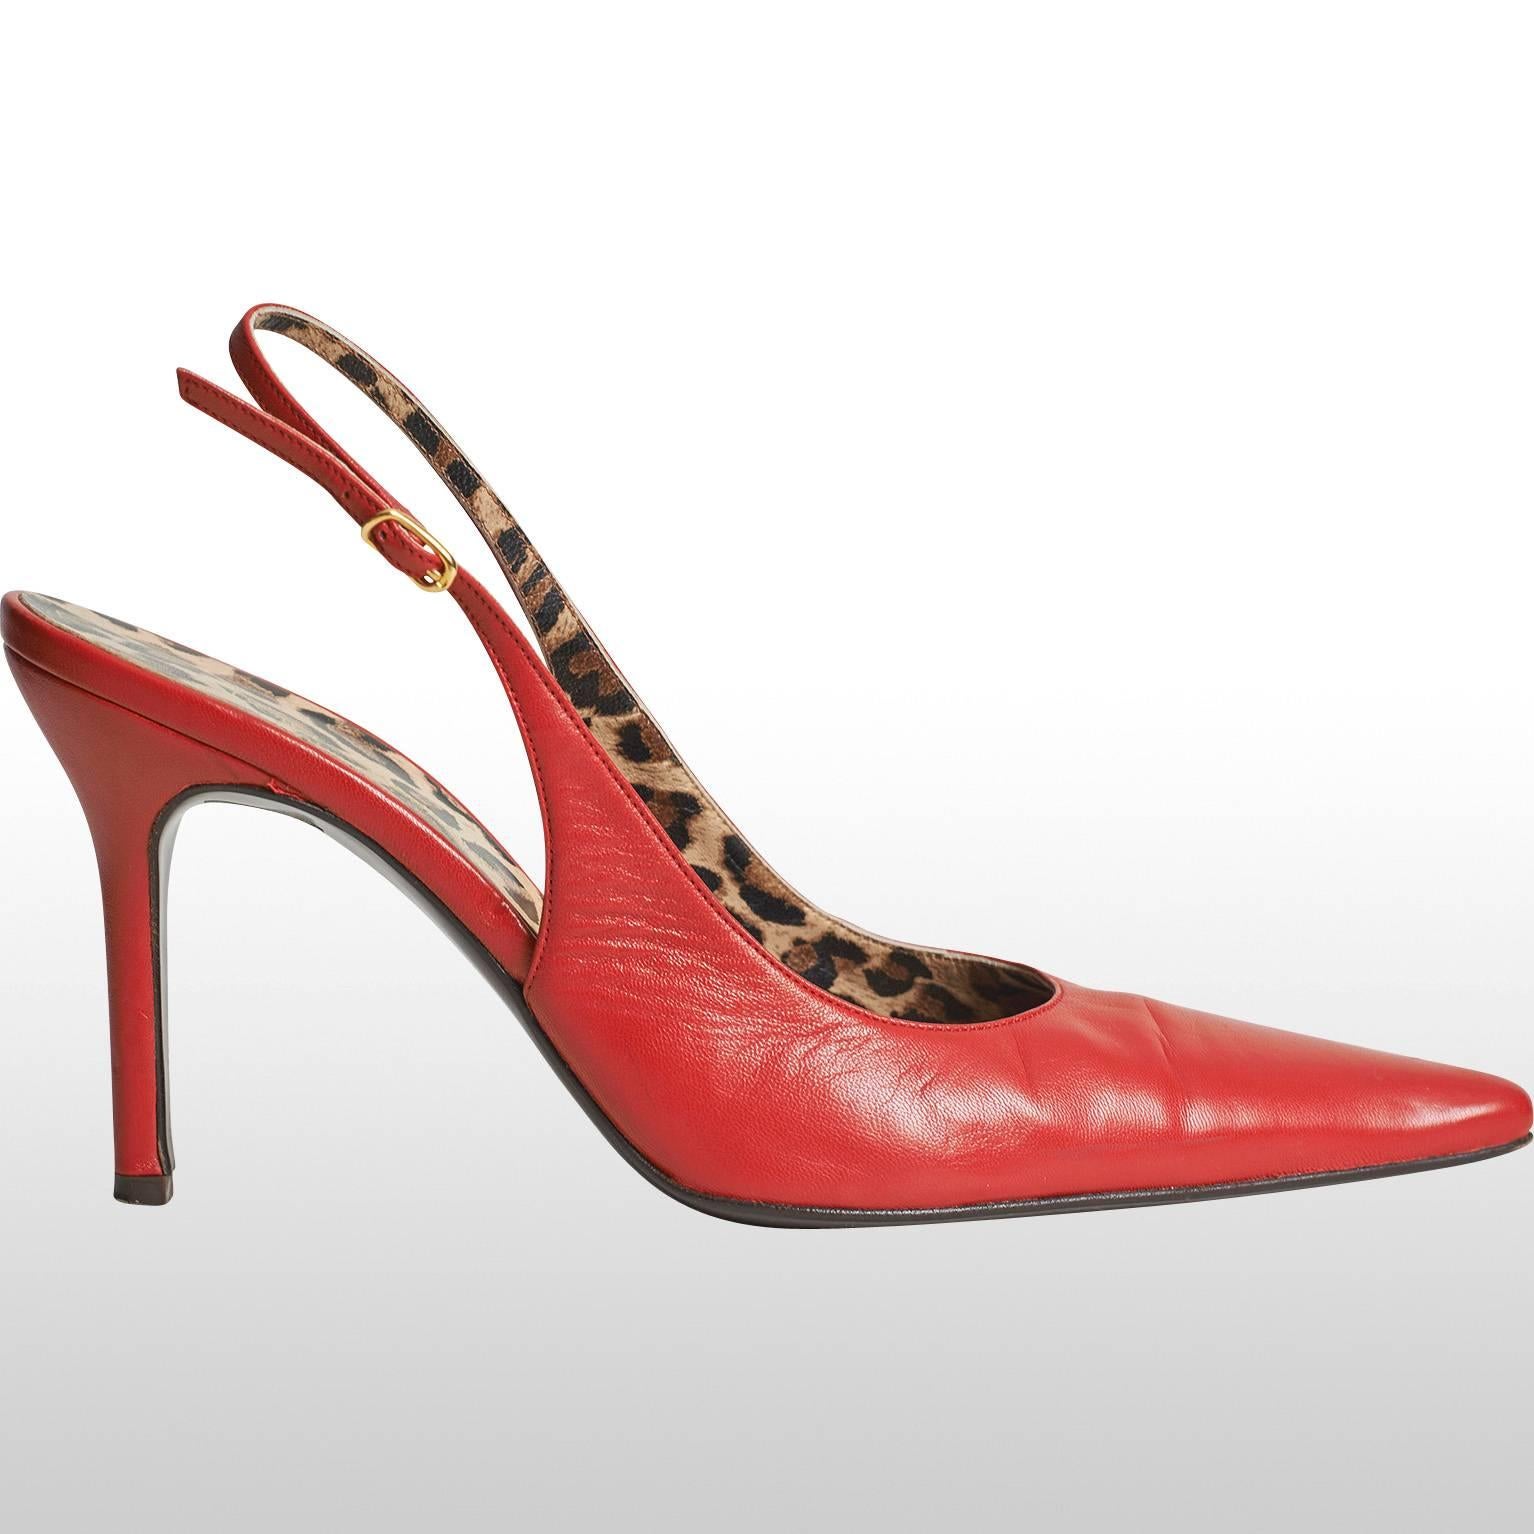 These gorgeous D&G red high heel sandals have a 4 inch heel. The insole of the sandal has a leopard print and the outer red part is made out of leather. The front of the shoe is pointy where as the heel is exposed and only secured by a small strap